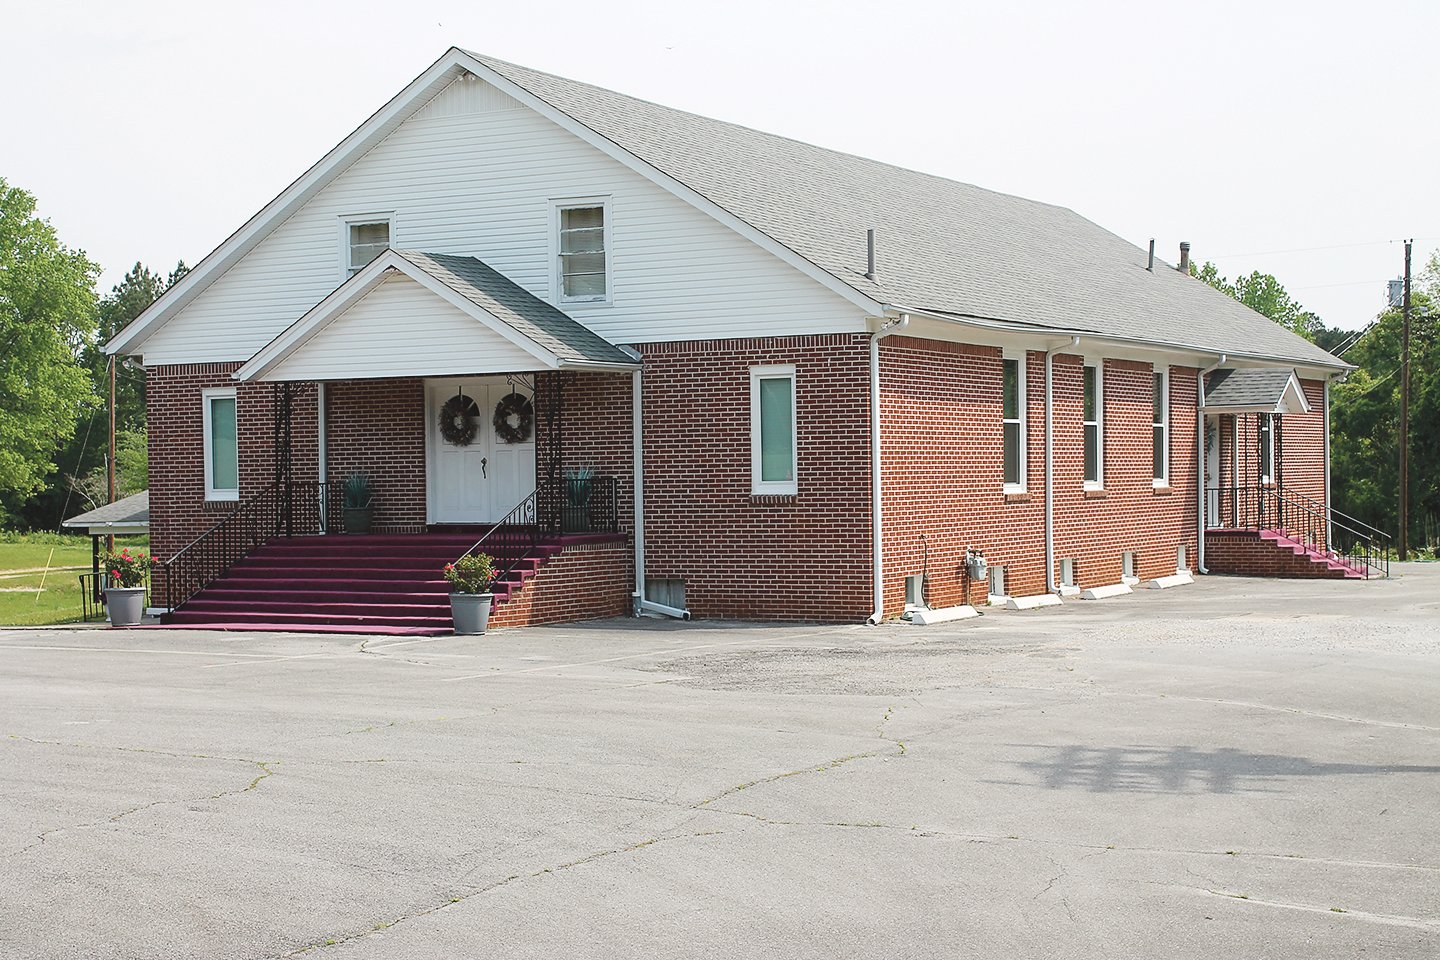 The church is located on Constitution Drive in Iuka.